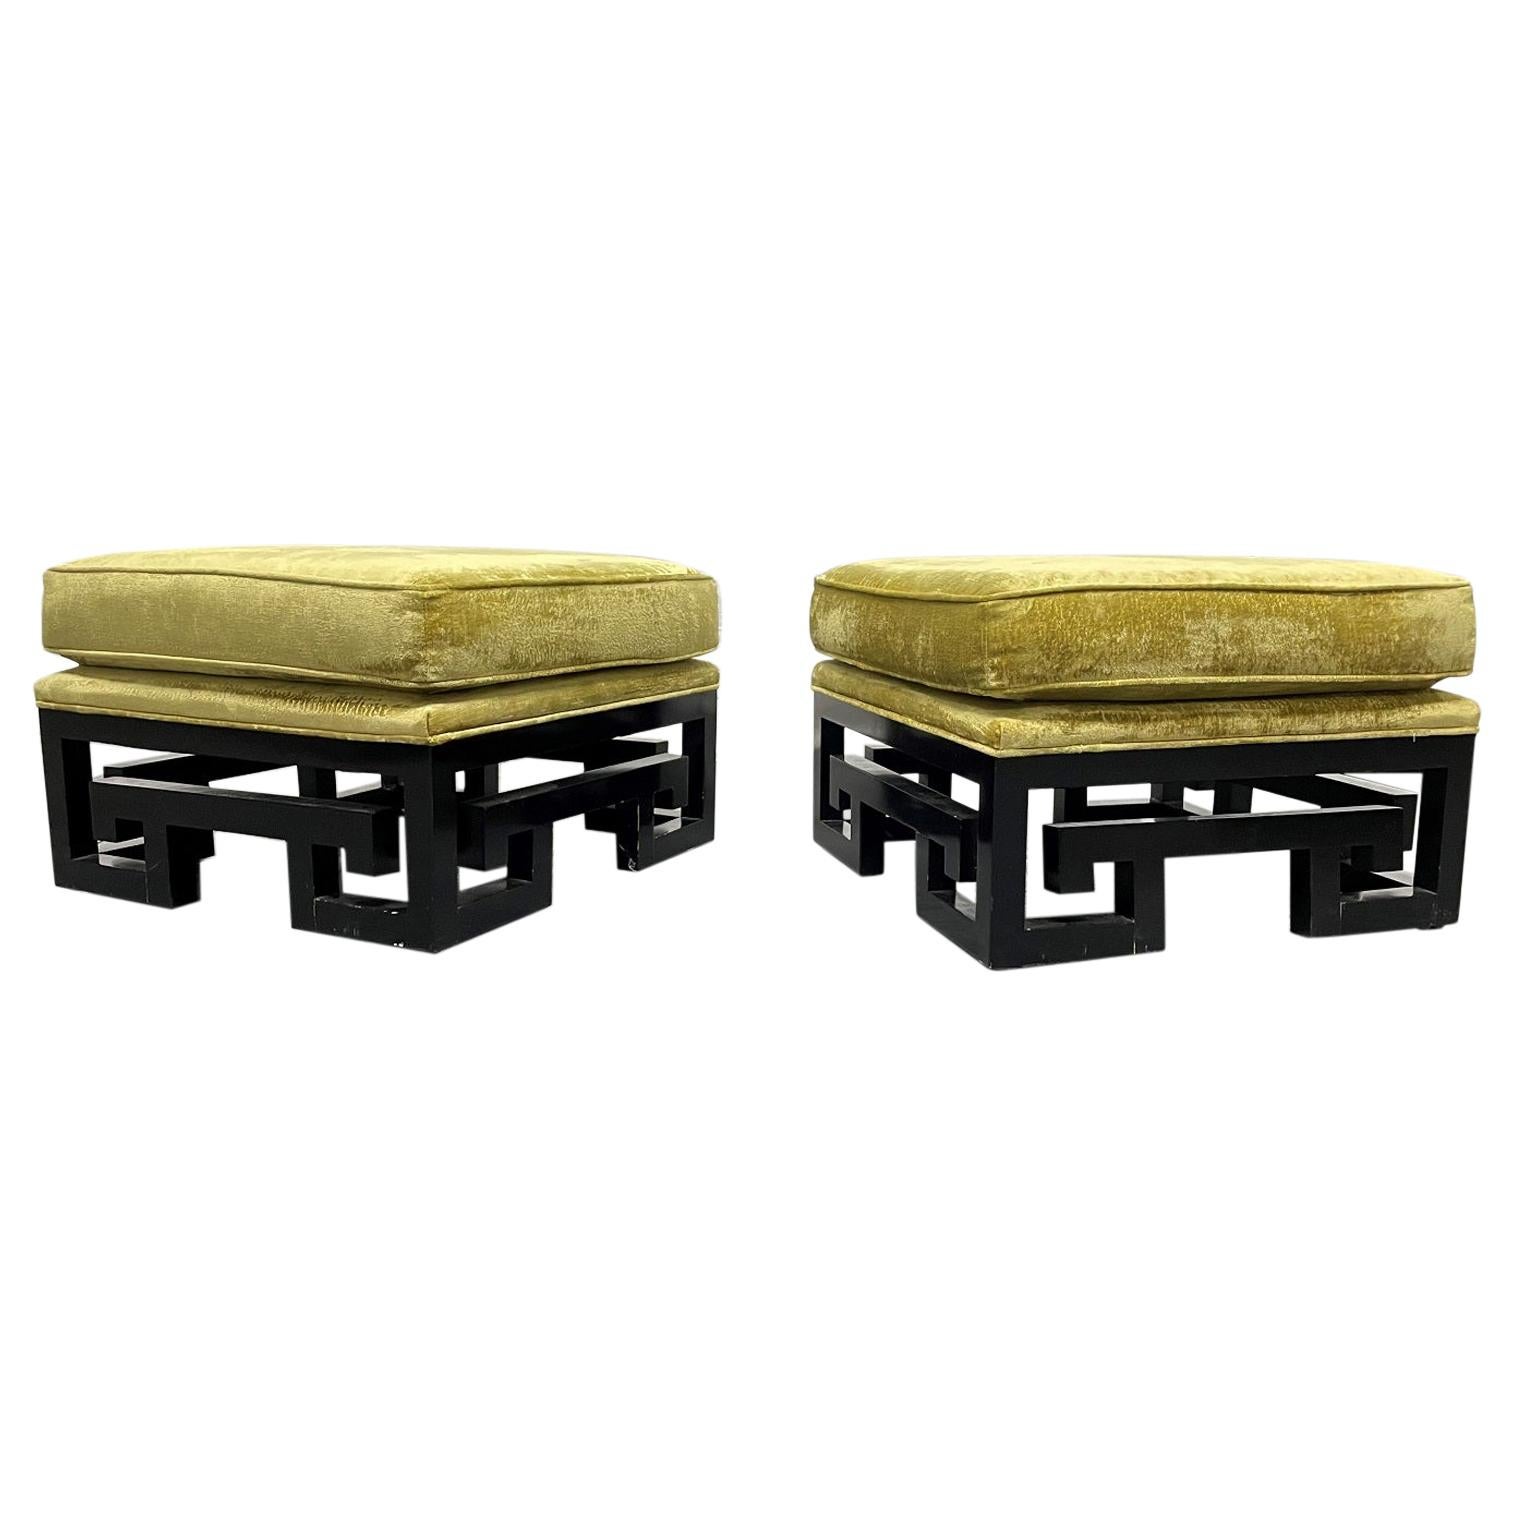 Pair of James Mont Style Asian Inspired Benches